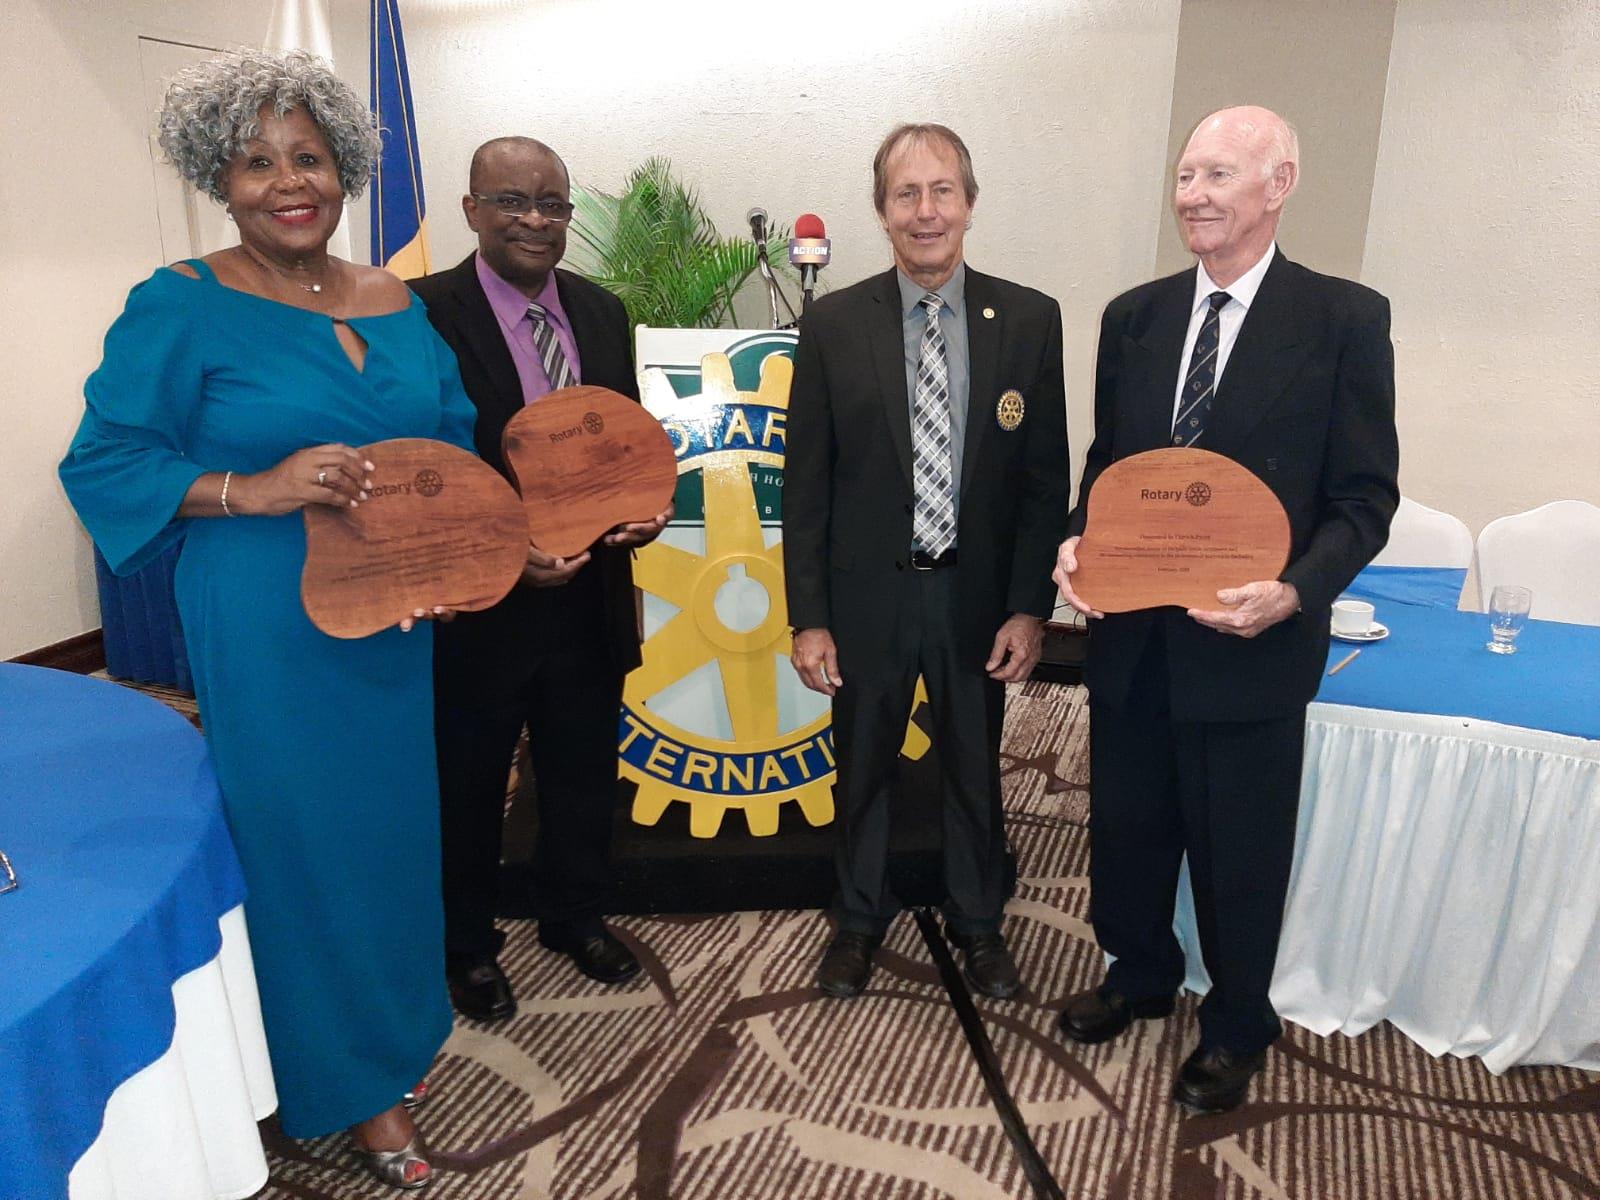 President Brian with 2020 awardees Marilyn Rice Bowen, Peter Edey and Patrick Frost